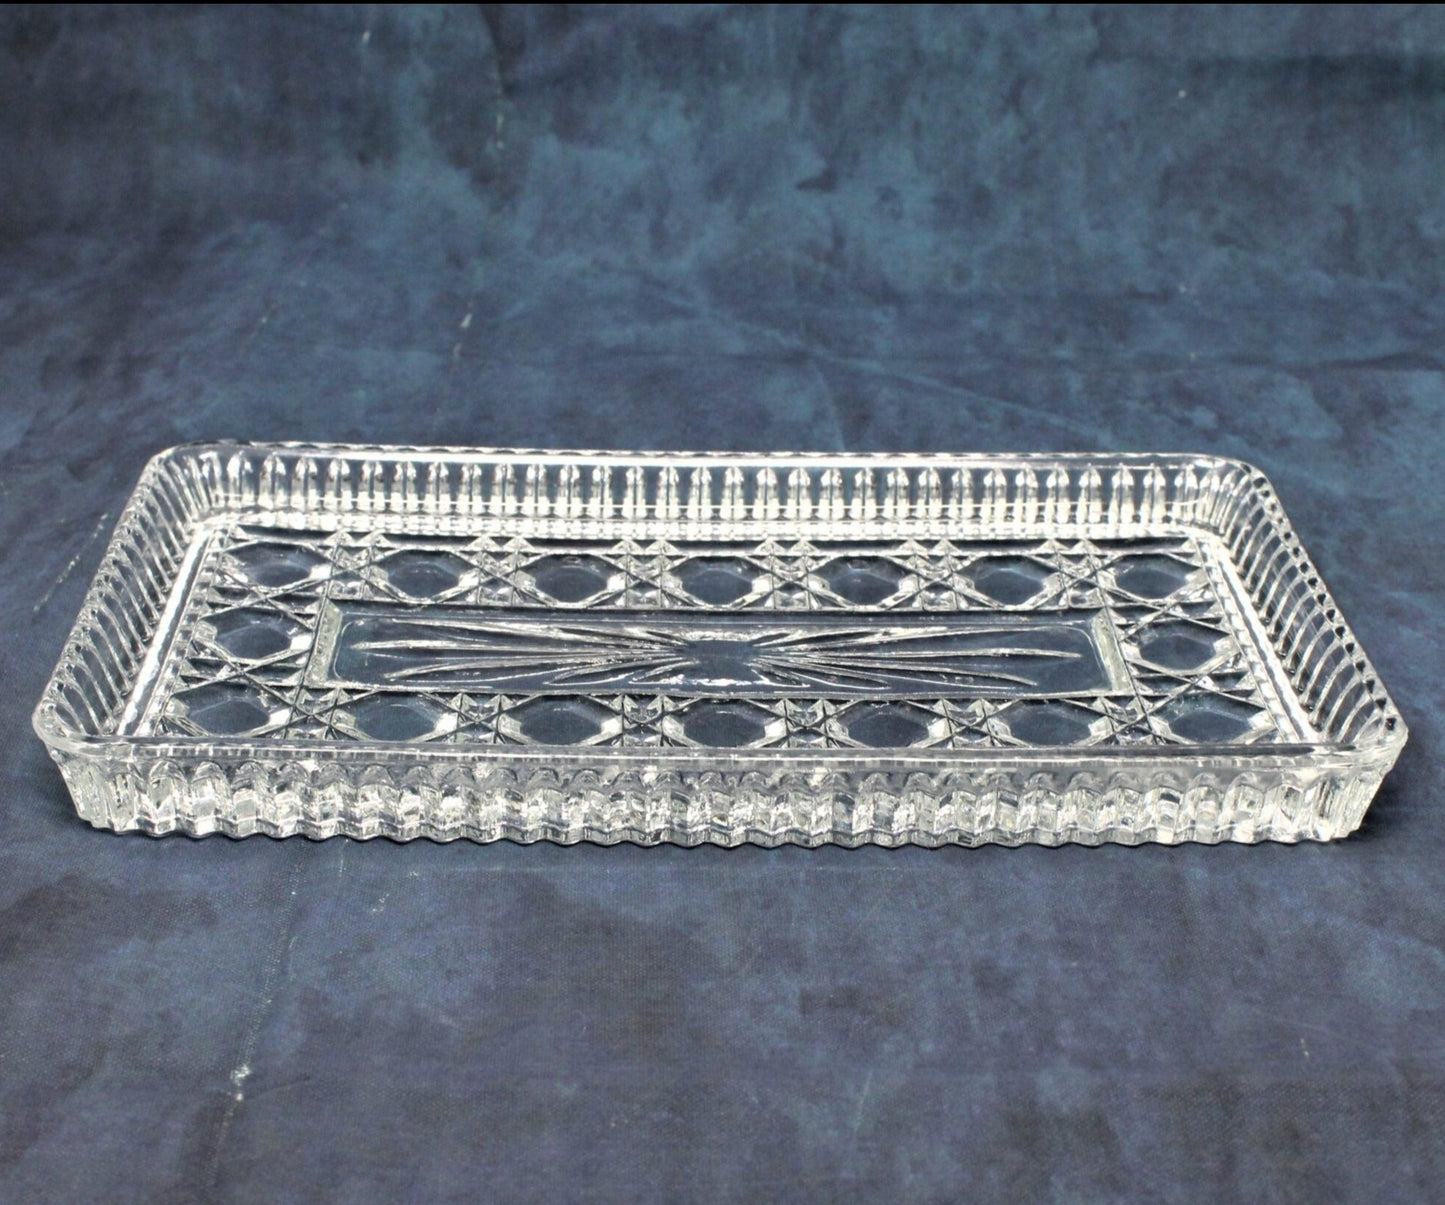 Tray, Federal Glass, Windsor Clear (Button and Cane), Vintage